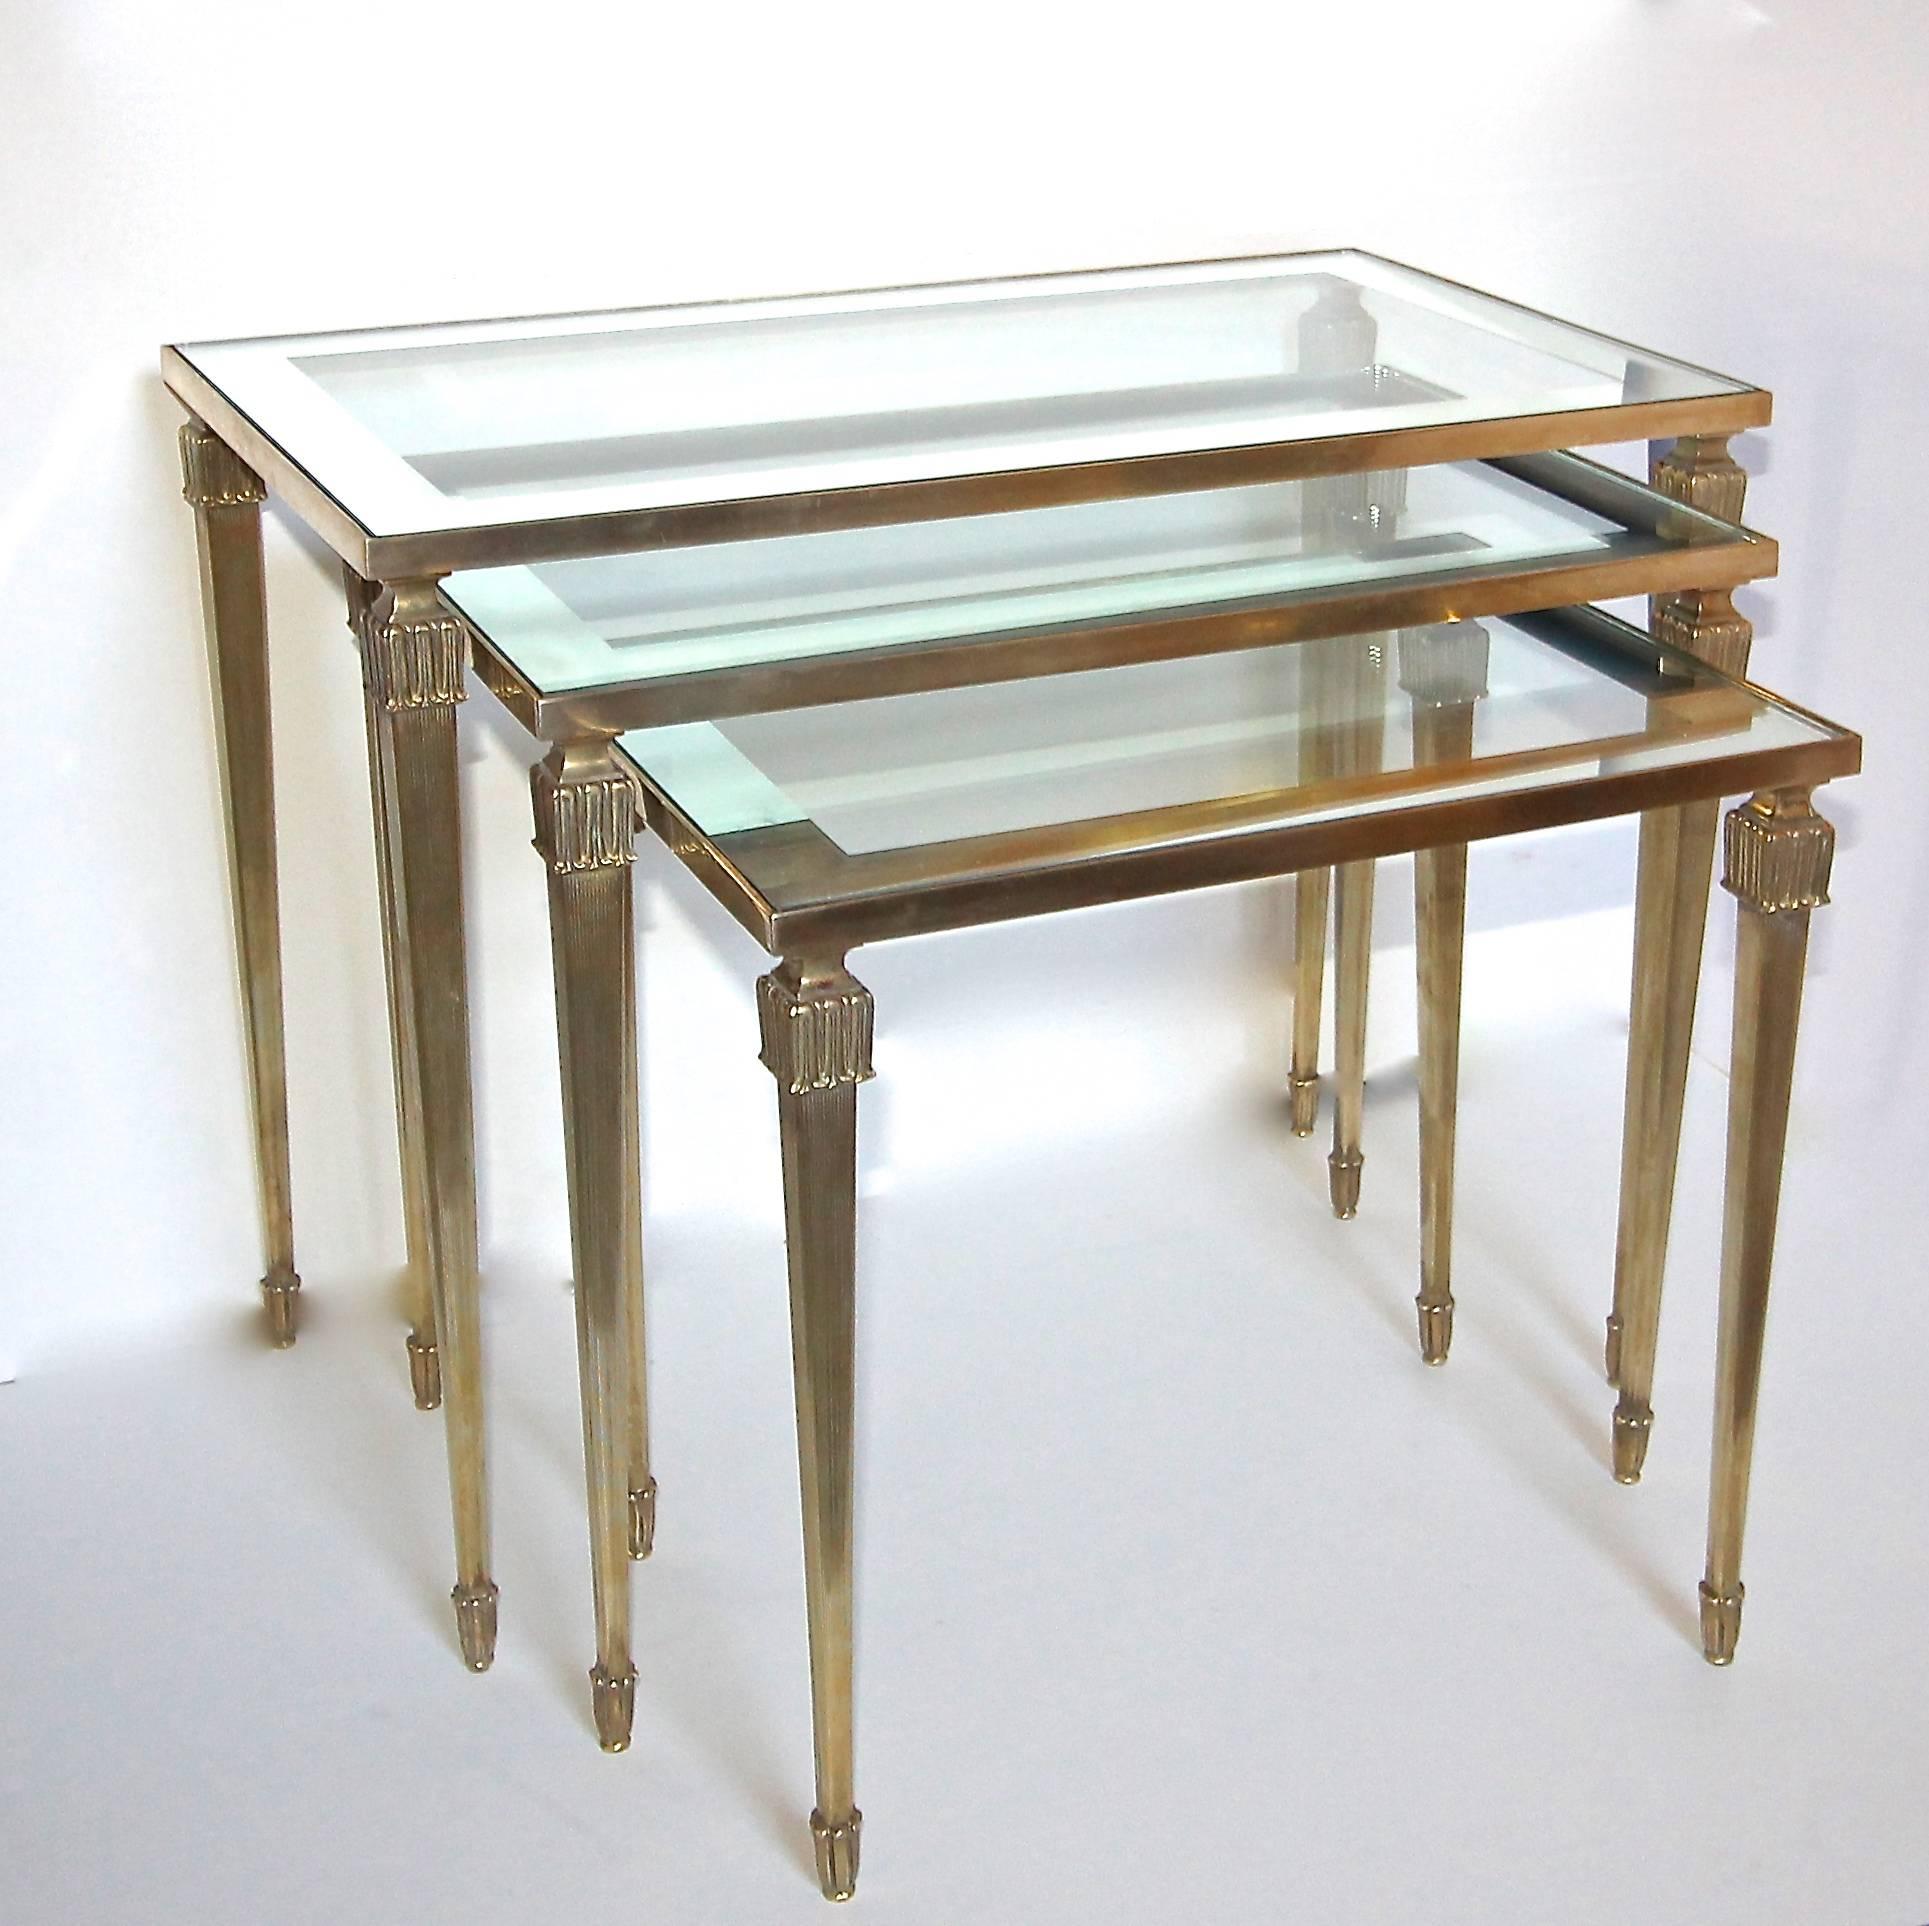 Trio of French solid brass nesting tables with mirrored edge glass tops, attributed to Maison Jansen. 

Size of each table: 
19" H X 23.5 W X 13.88" D.
17.25" H X 20" W X 12.75" D. 
15.5" H X 16.5" W X